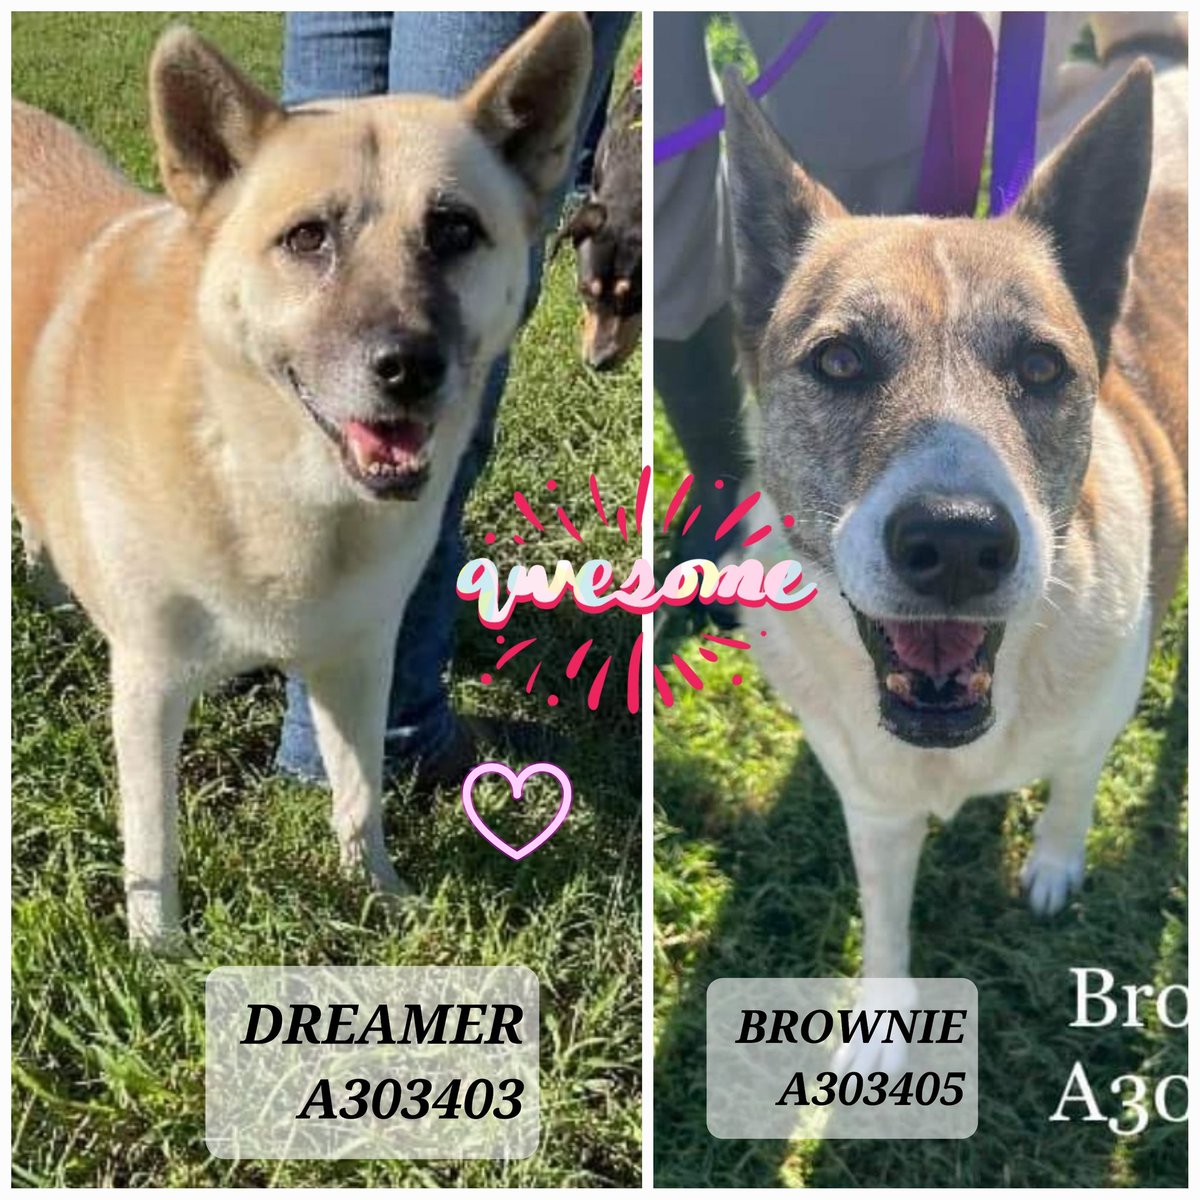 🆘️🙏🤞#SeniorAlert #BondedPair #AkitaLovers Help by RT and #PledgeForRescue for 8 yo sisters DREAMER & BROWNIE #AdoptDontShop 
They have until  Th 10/26 at #CorpusChristiACS 
Shelter links with contact info ⬇️. Pledge here for rescue as shelter doesn't accept pledges